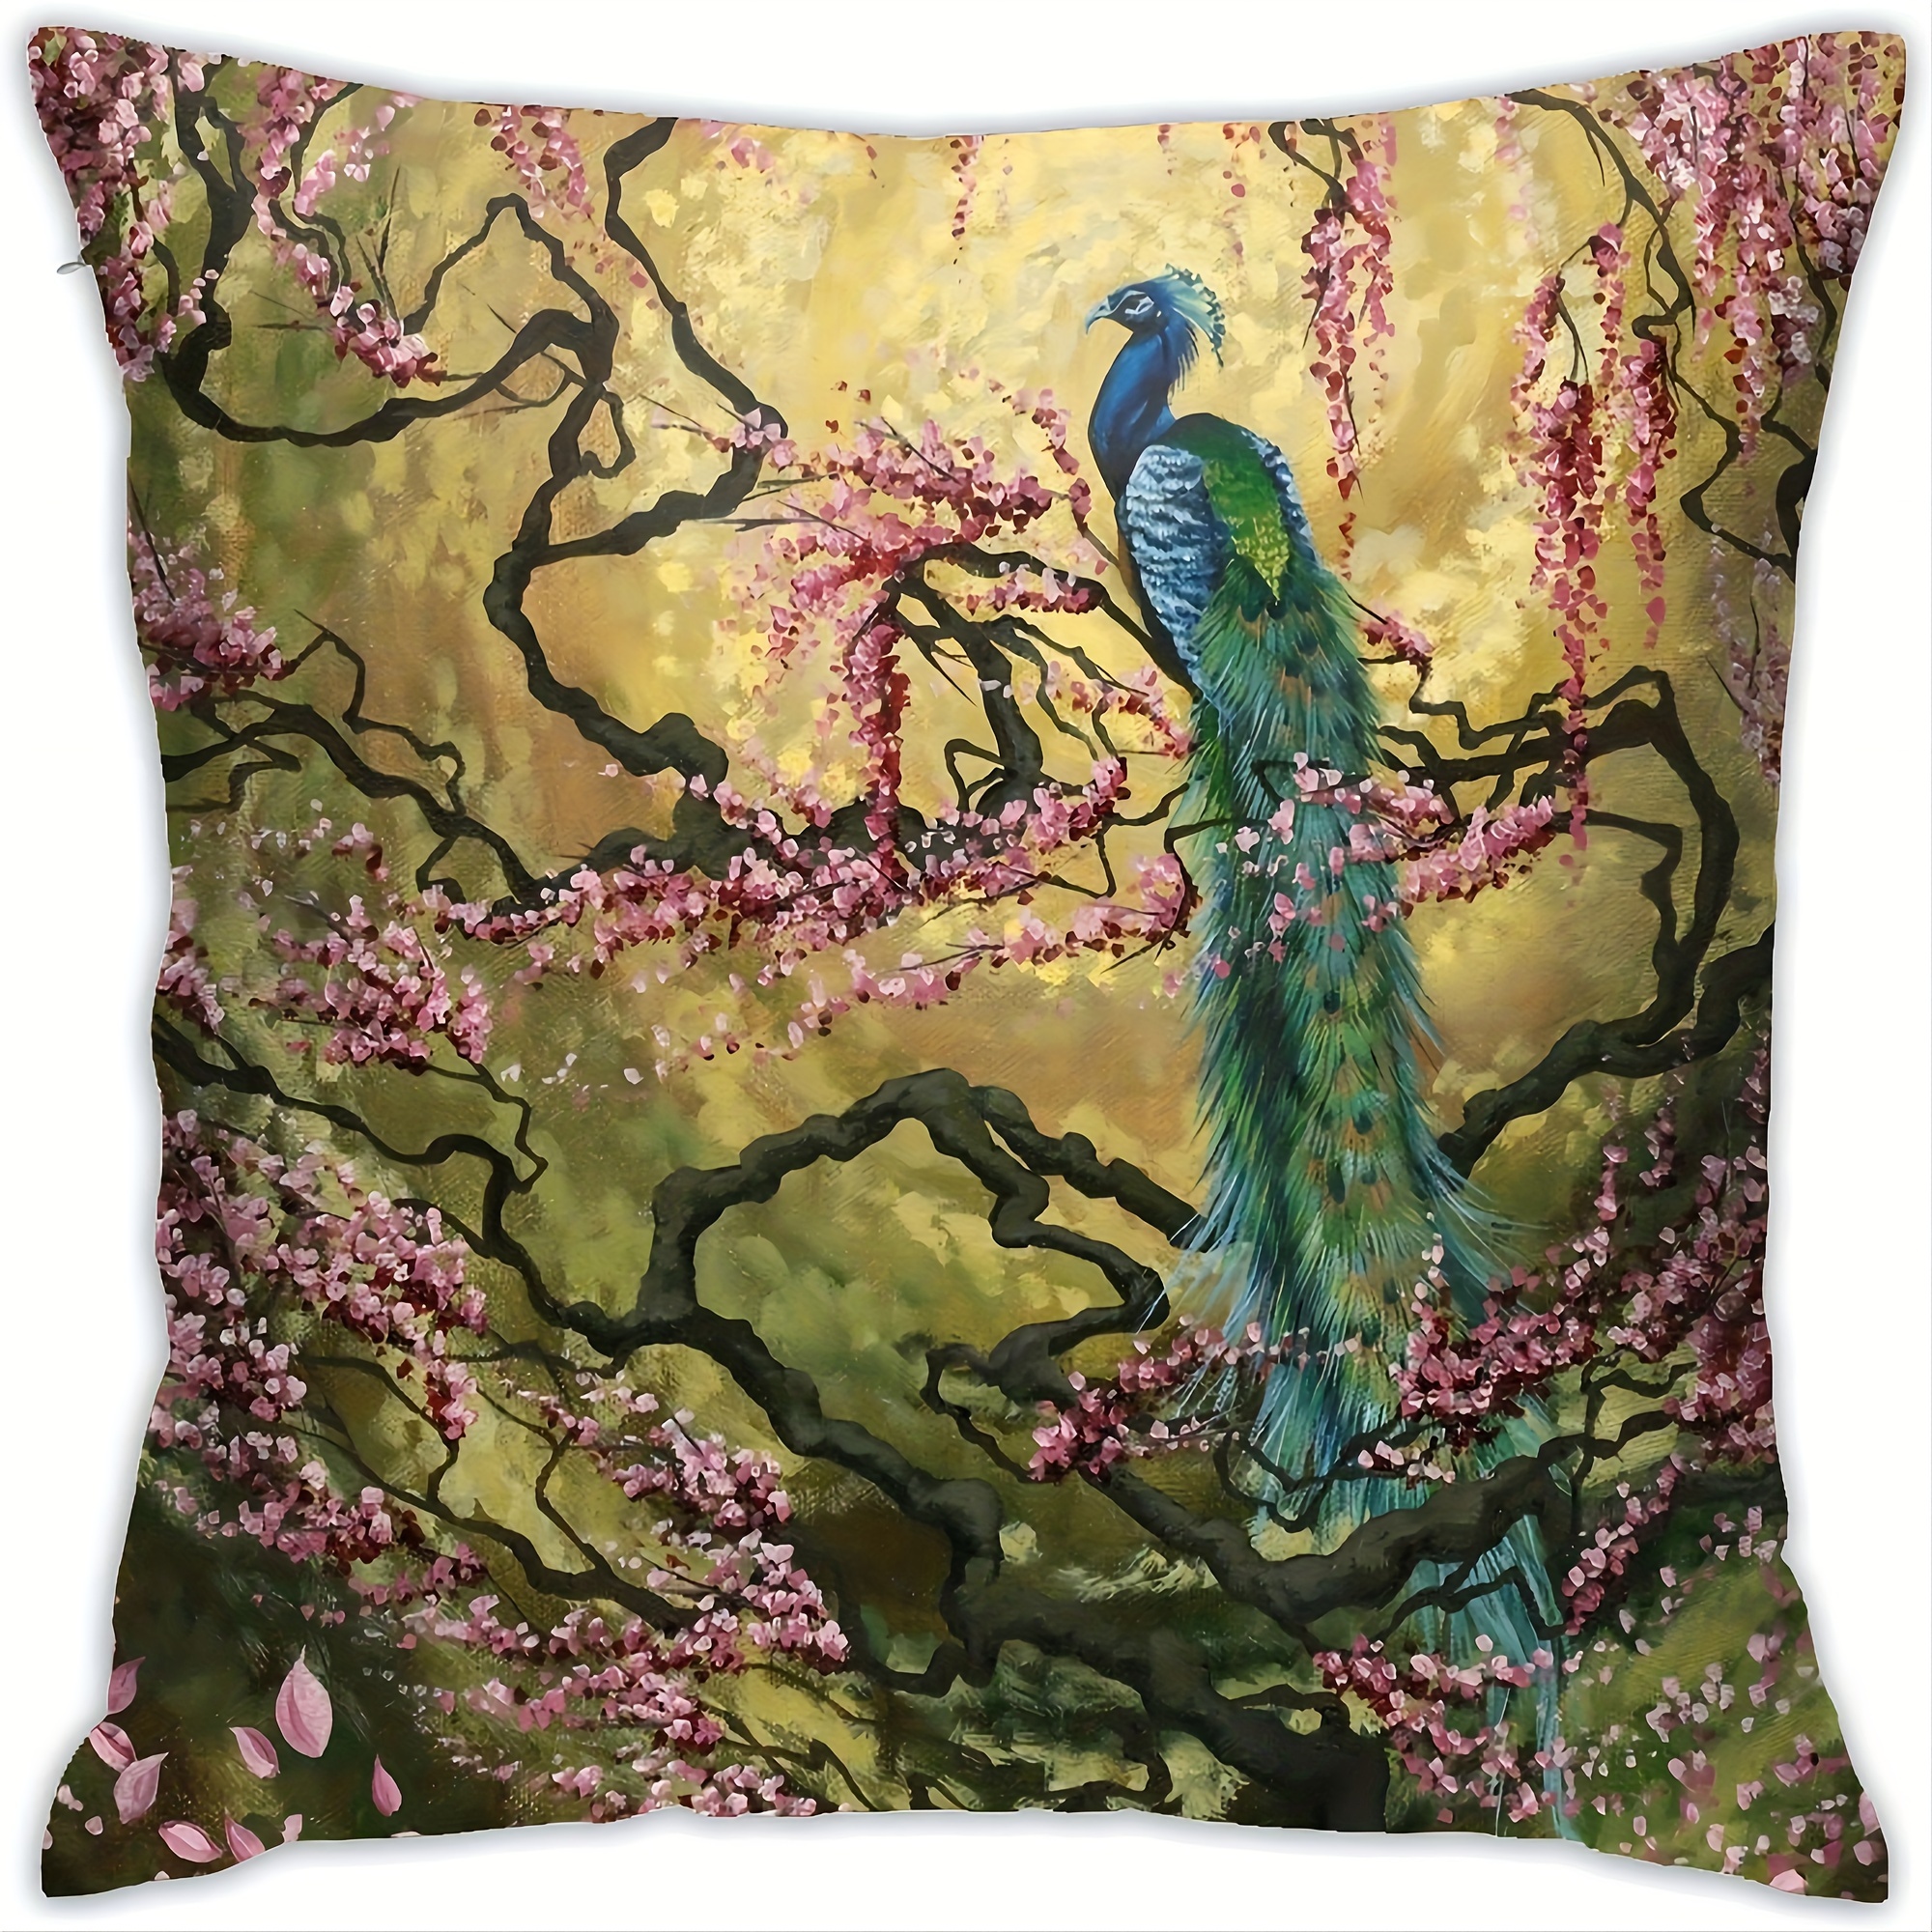 

1pc, Peacock And Blossoms Pillow Covers, Decorative Throw Pillowcase Couch Cushion Cover For Home Decor Sofa Living Room Bed Car Sofa Short Plush Decor 18x18 Inch Without Pillow Core